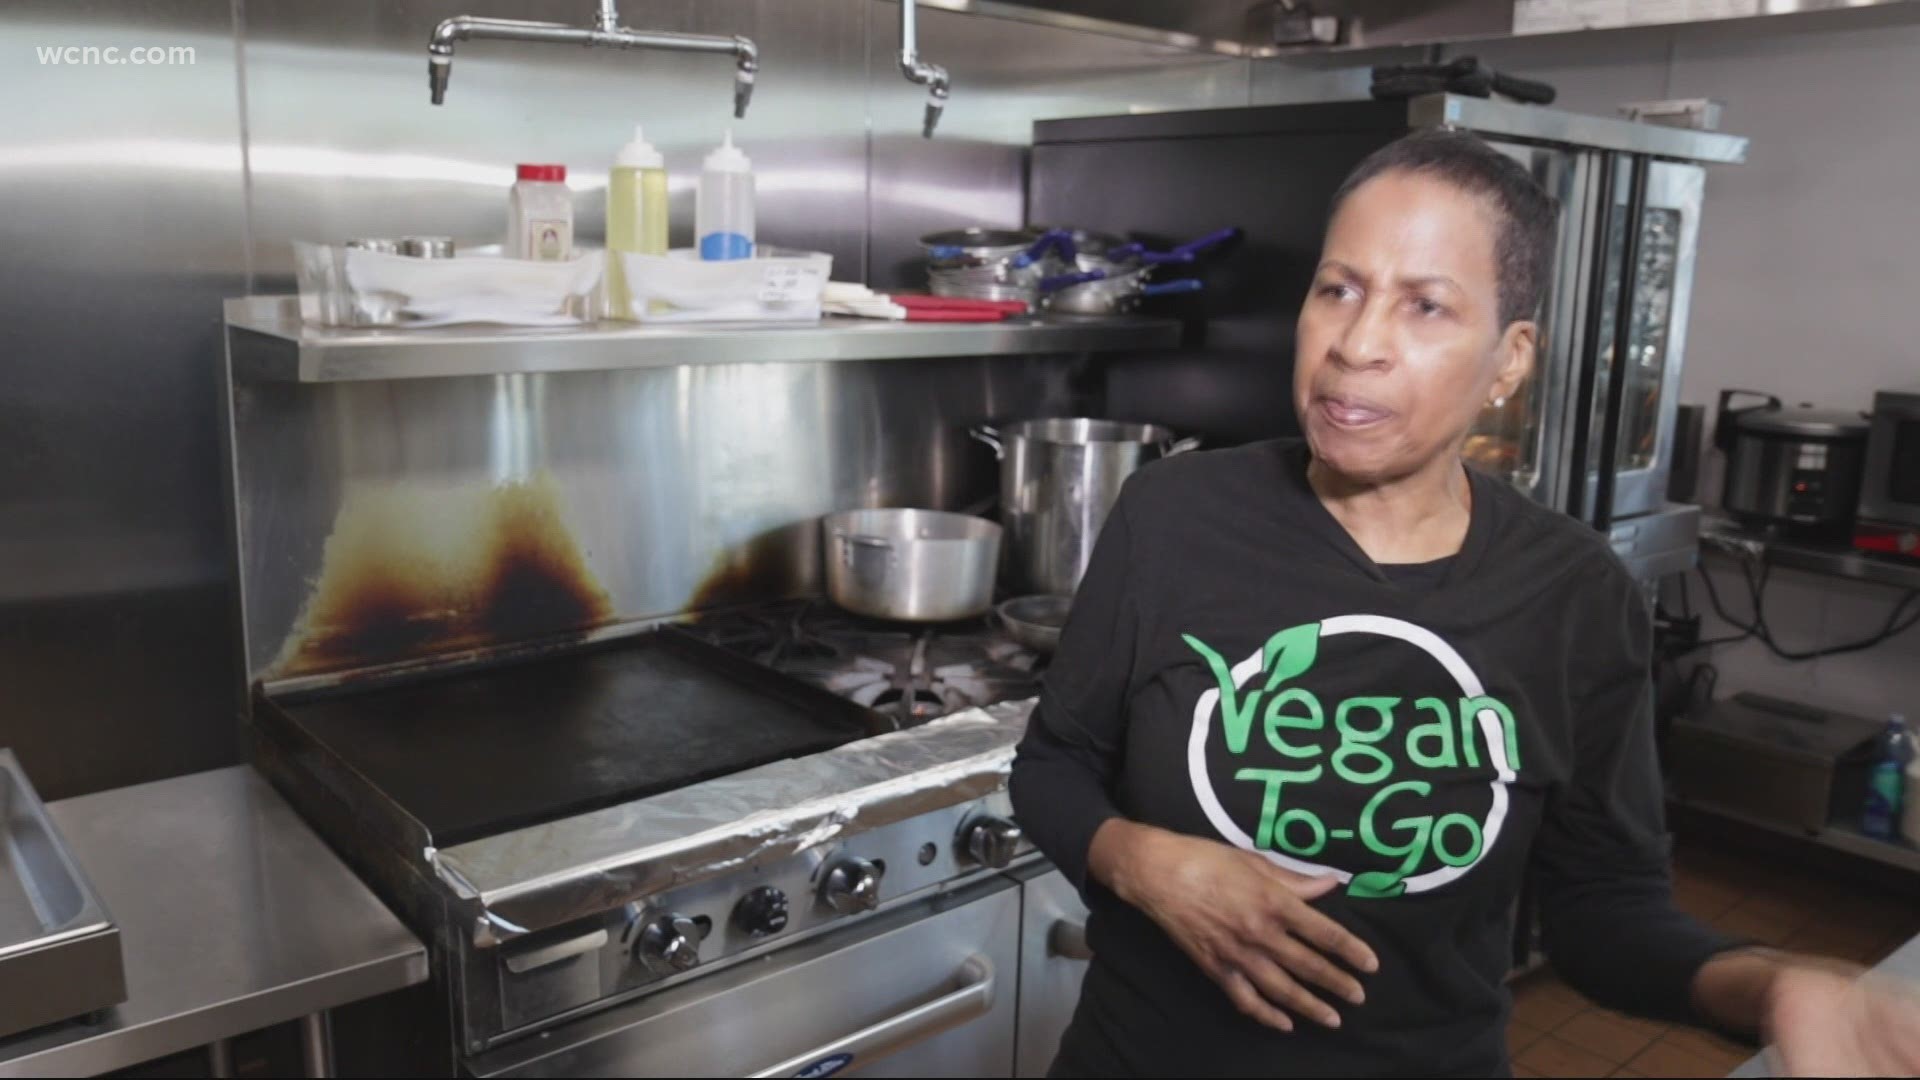 A Charlotte chef is breaking barriers by bringing healthy food to communities of color, where access to fresh produce is typically limited.